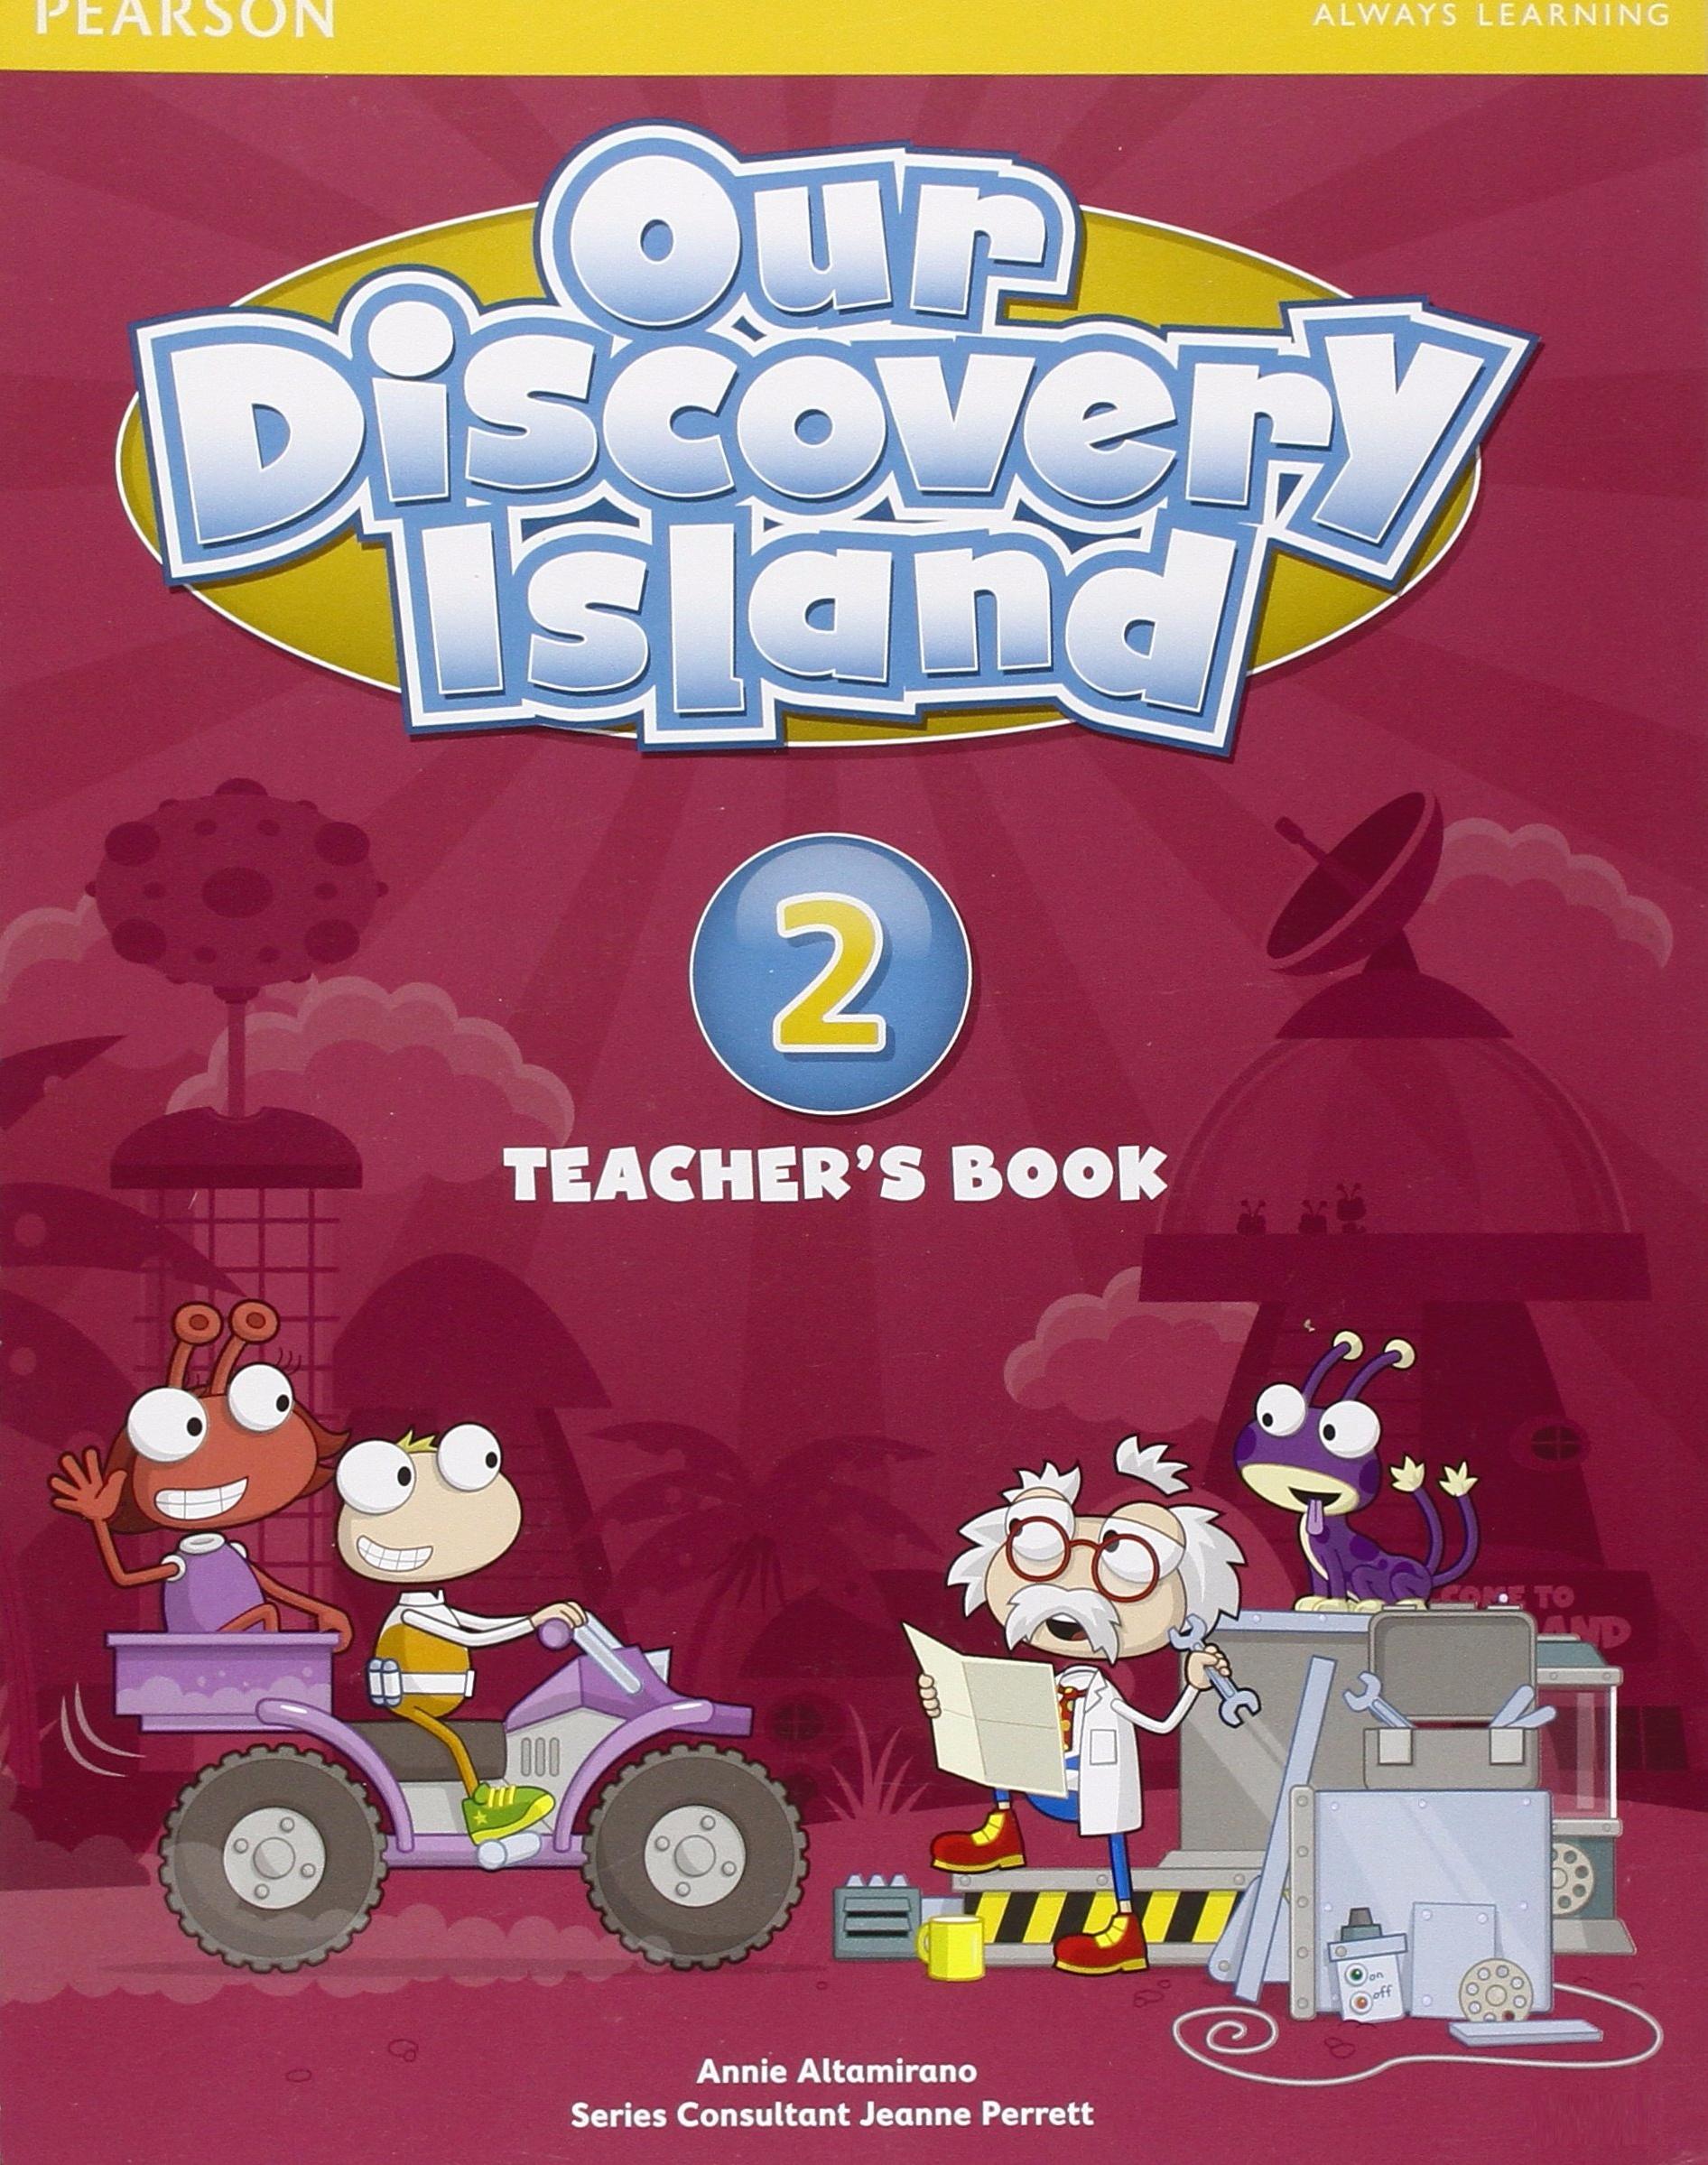 OUR DISCOVERY ISLAND 2 Teacher's Book + Pin Code